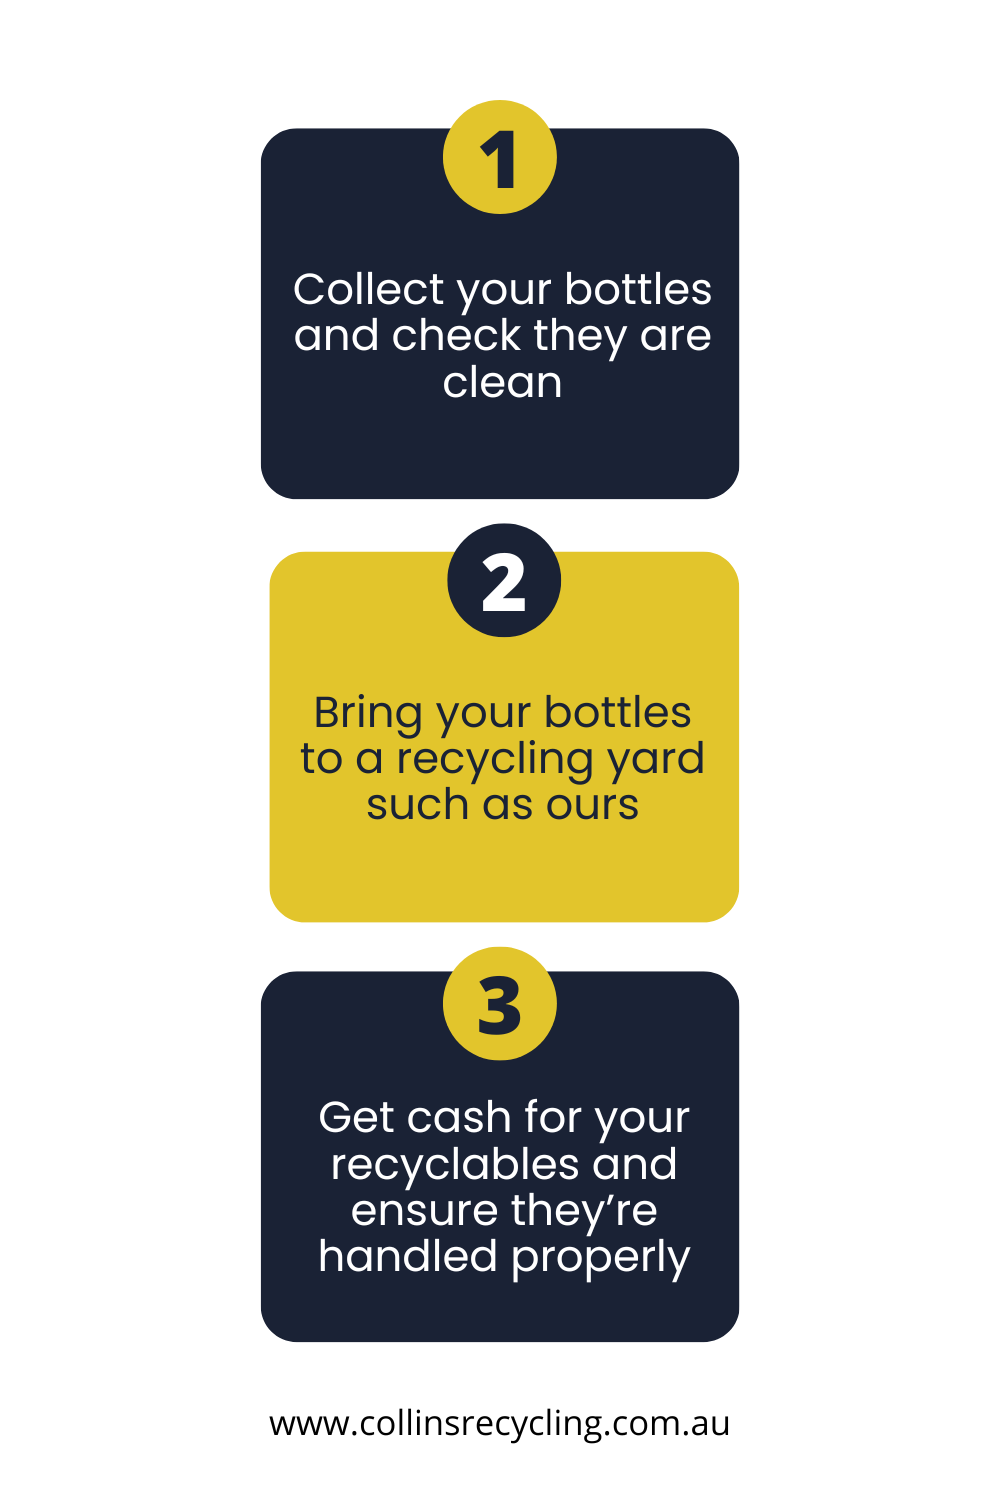 Infographic showing 3 steps to recycling stainless steel bottles including collecting the scrap, taking them to a recycling yard, and getting them recycled by experts